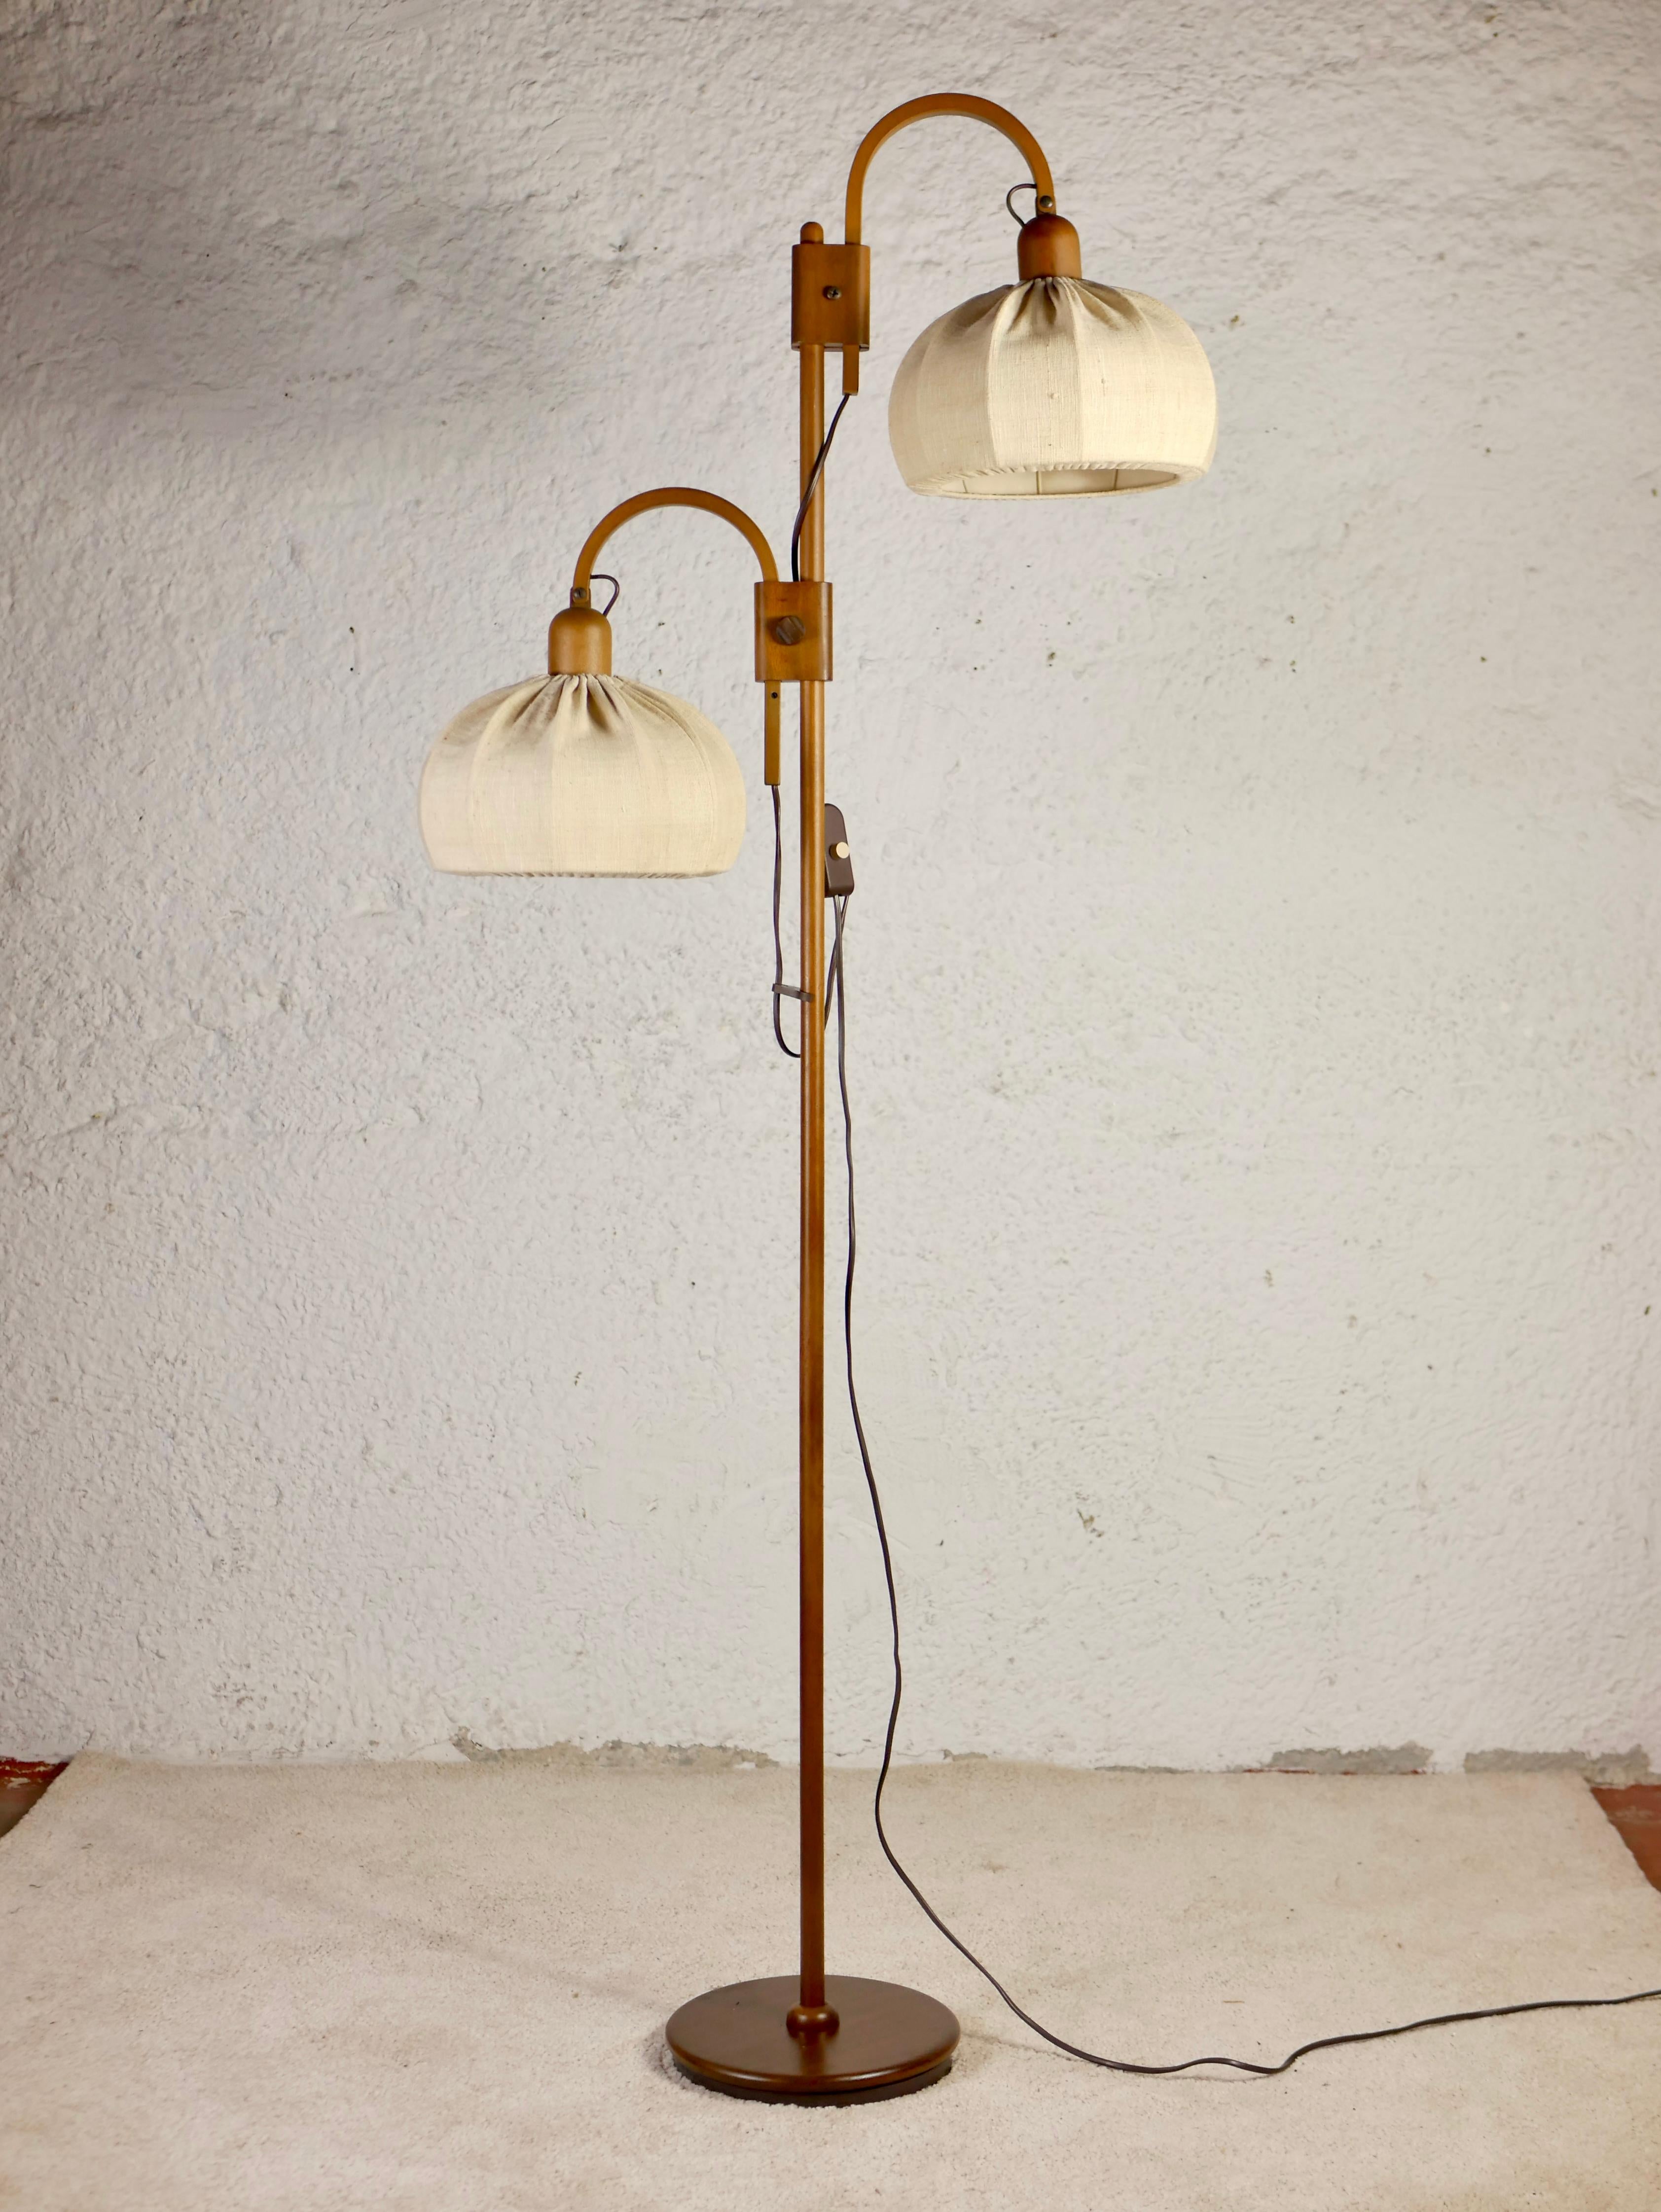 Beautiful double floor lamp made in Denmark in the 1970s by Domus.
In teak wood, and cotton fabric.
Entirely adjustable (360°, height, angle).
Very good condition, the cotton lampshades are removable and can be washed easily.
Dimensions : height